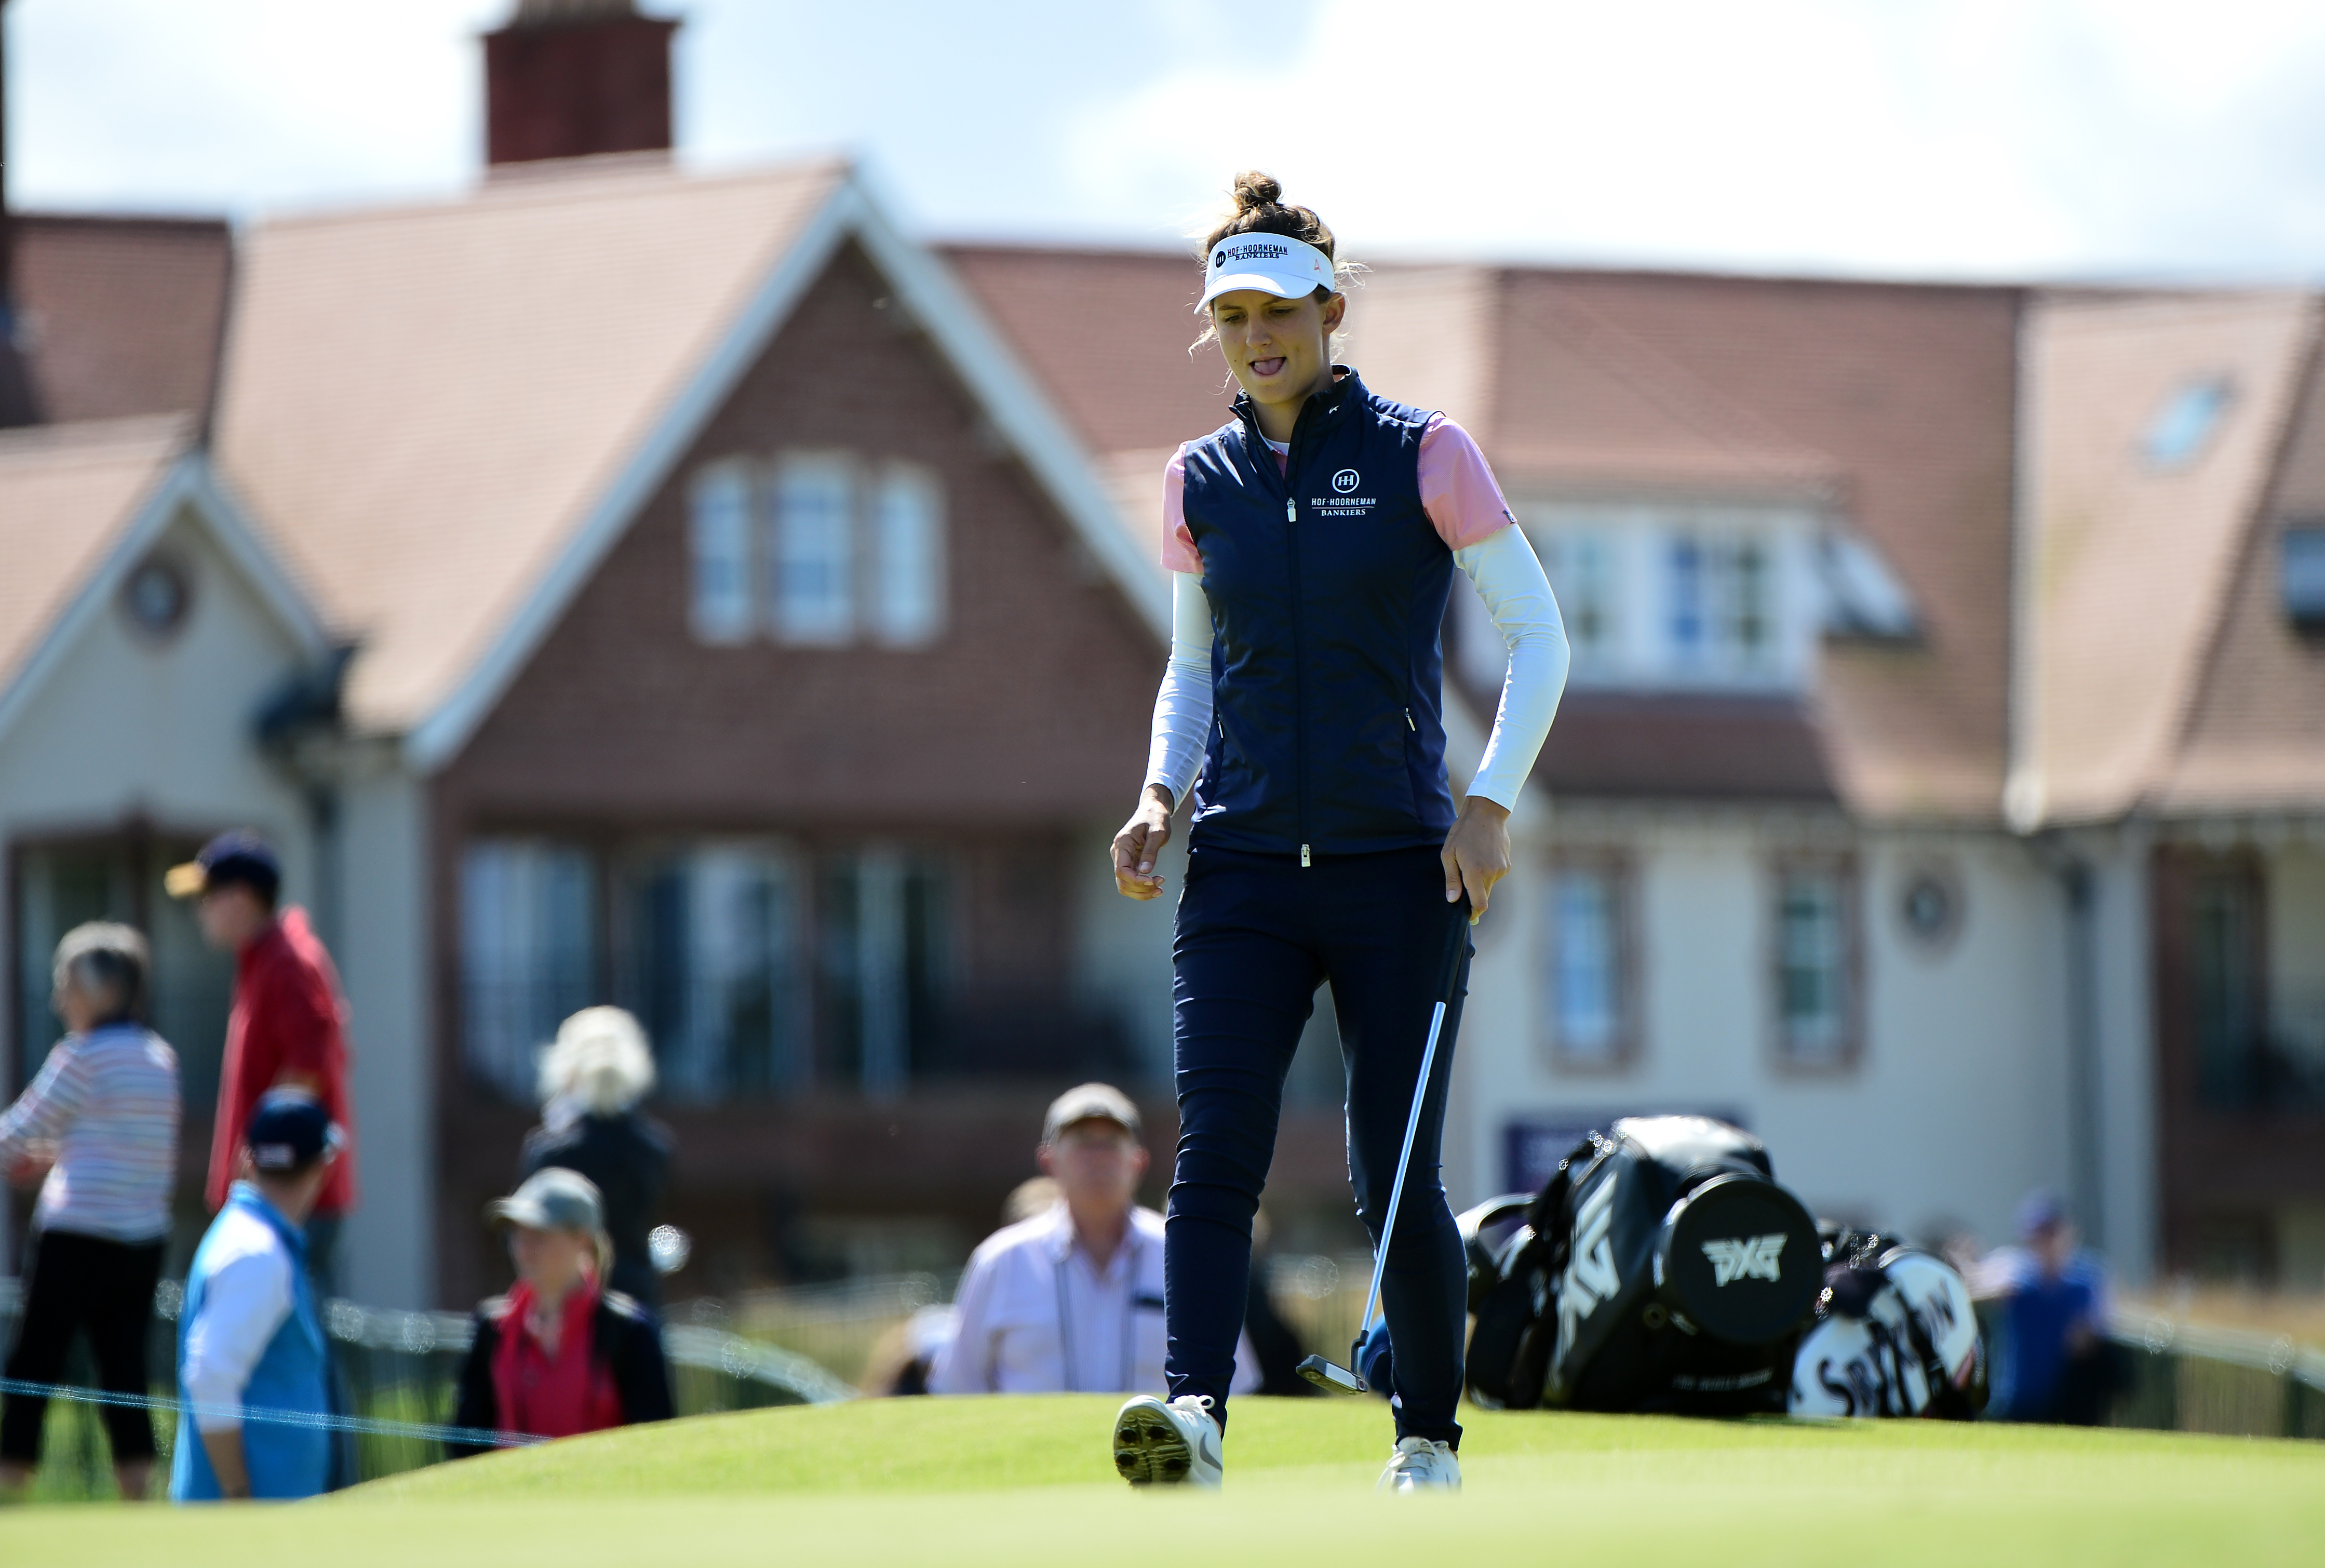 Anne Van Dam of Netherlands putting at the 9th hole during the first day at the Aberdeen Standard Investment Ladies Scottish Open.